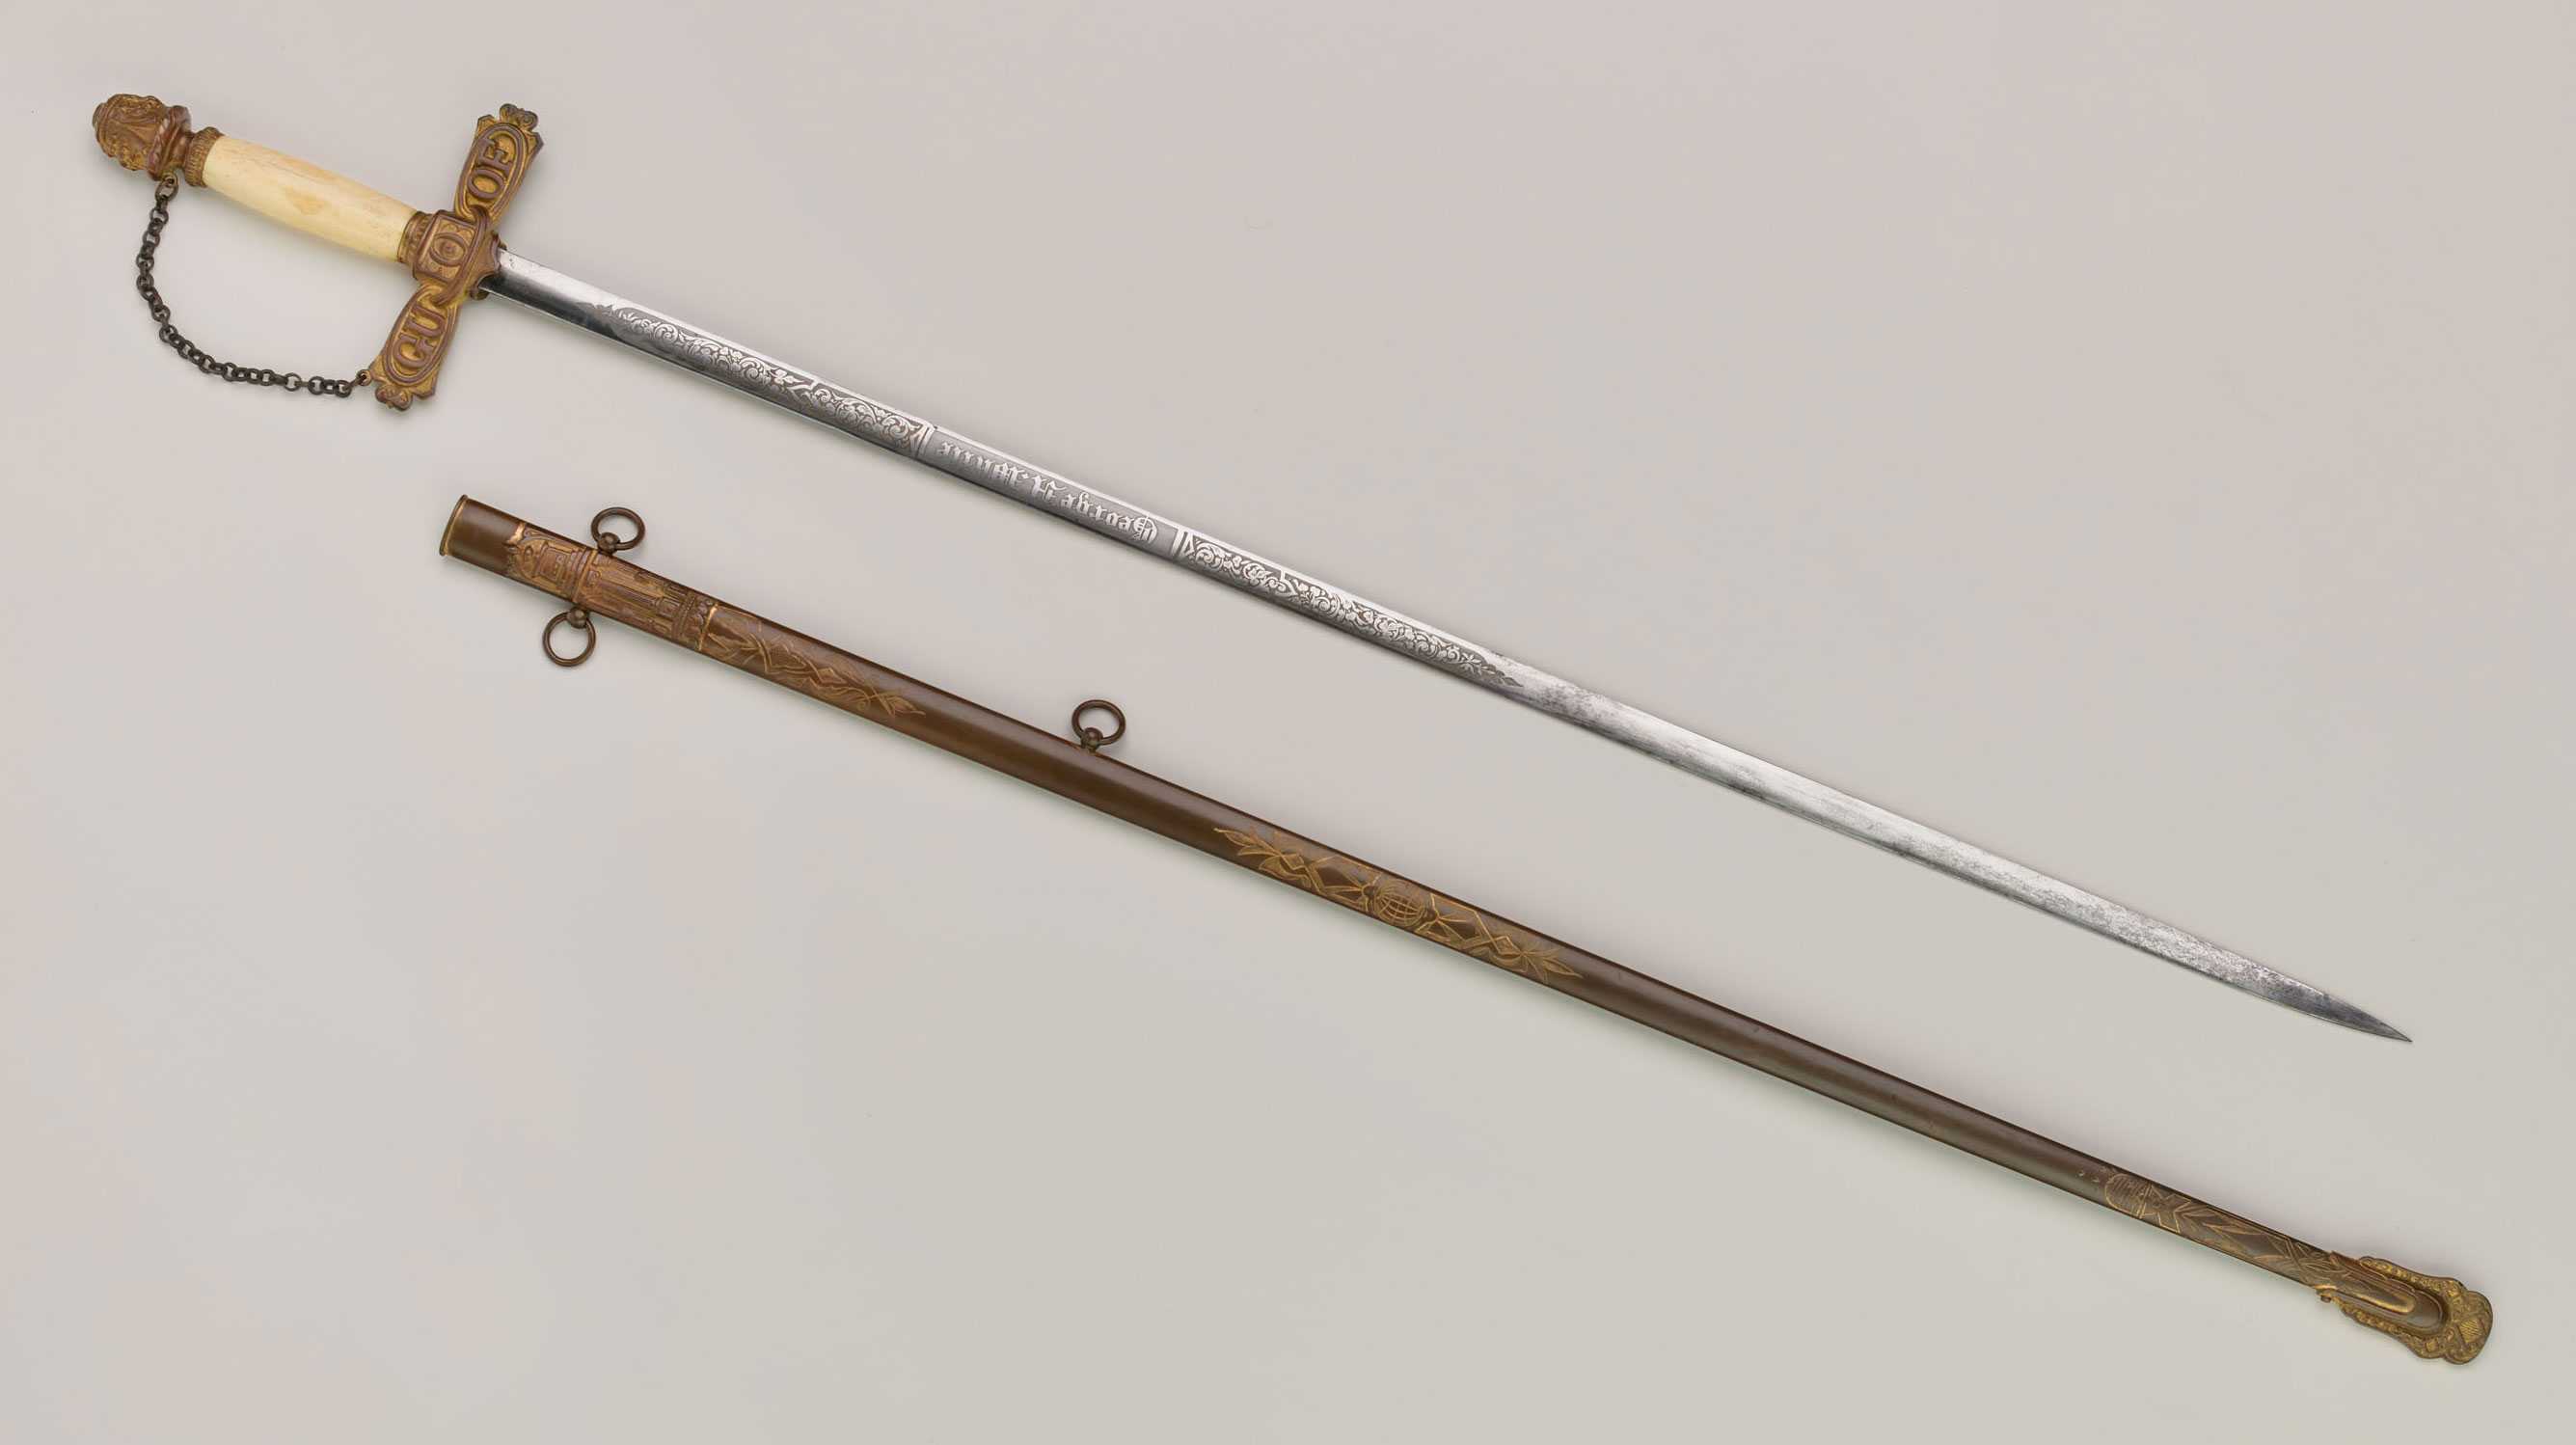 A thin sword and the protective scabbard. The handle of the sword as a chain connect.